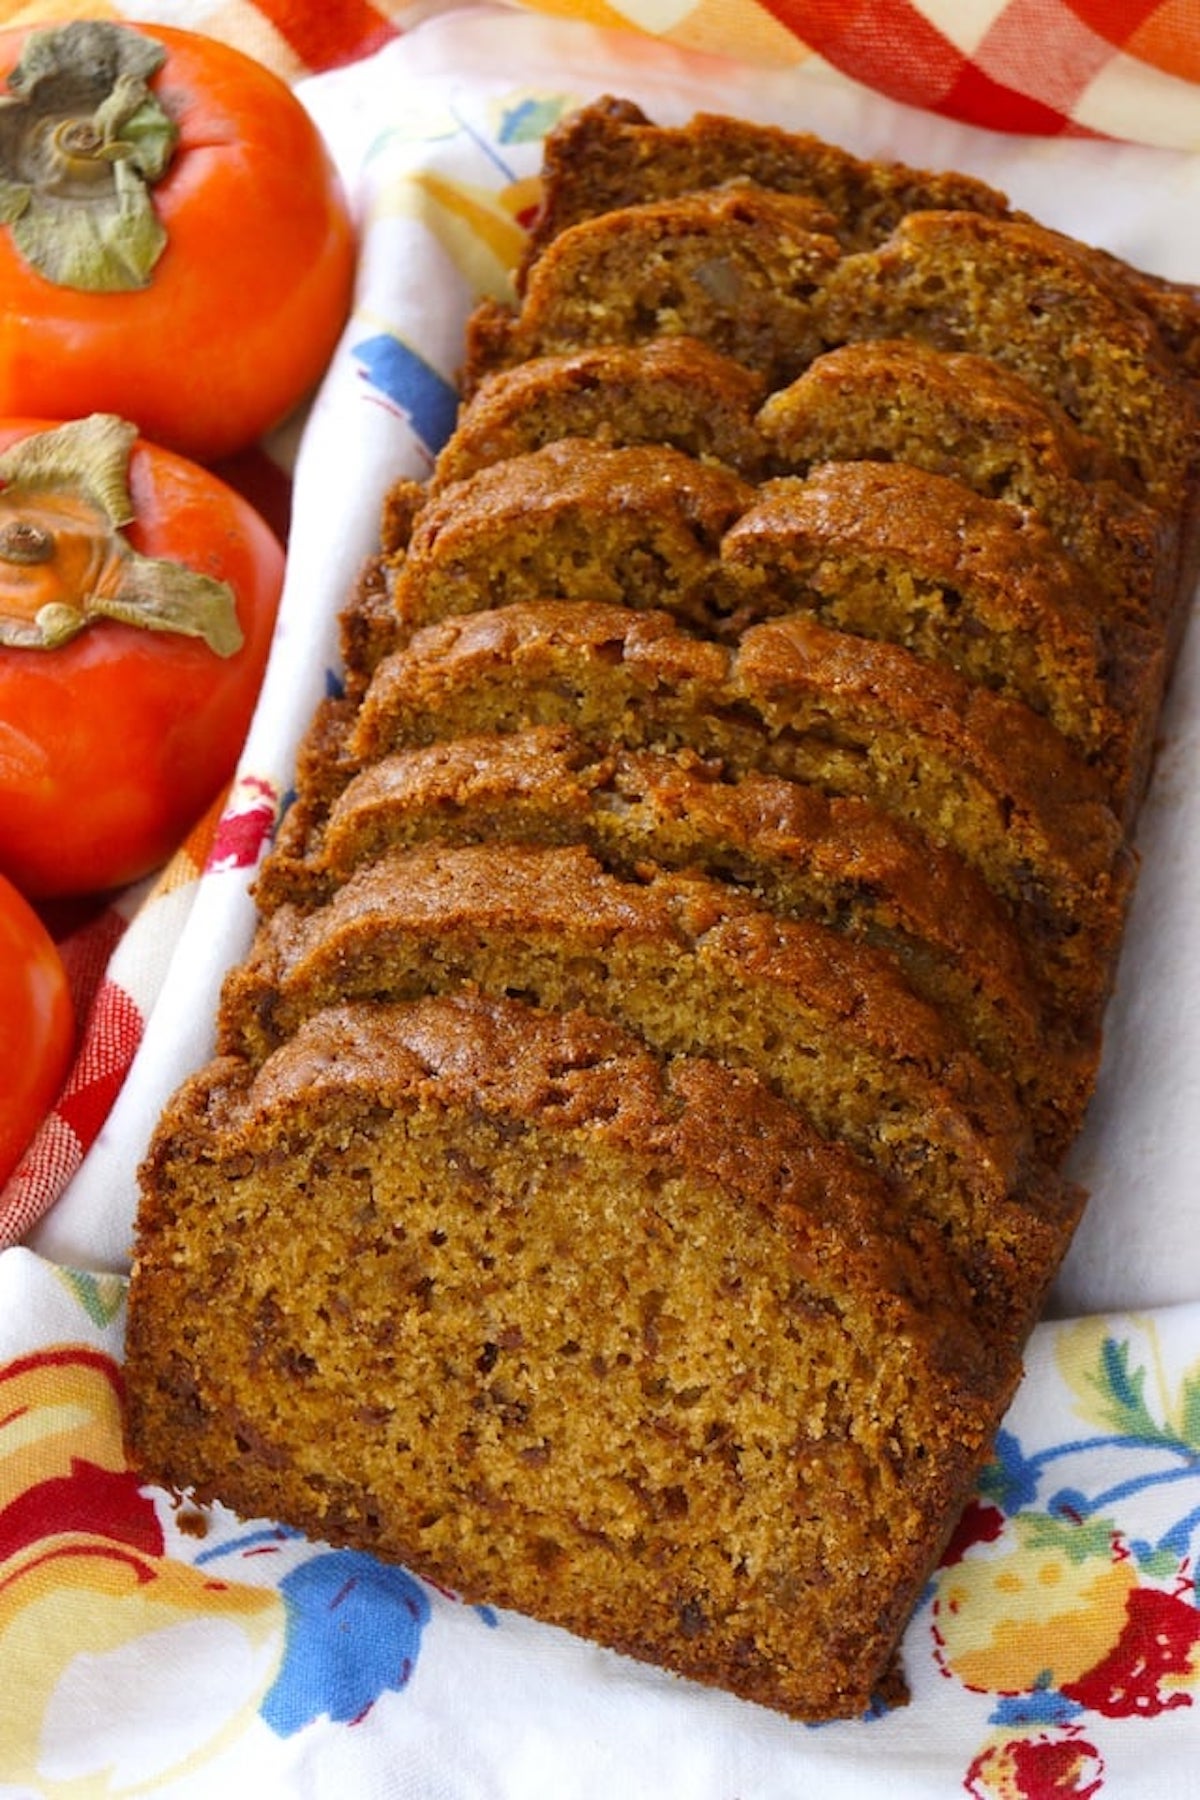 Sliced loaf of ginger persimmon bread with 3 whole persimmons next to it.